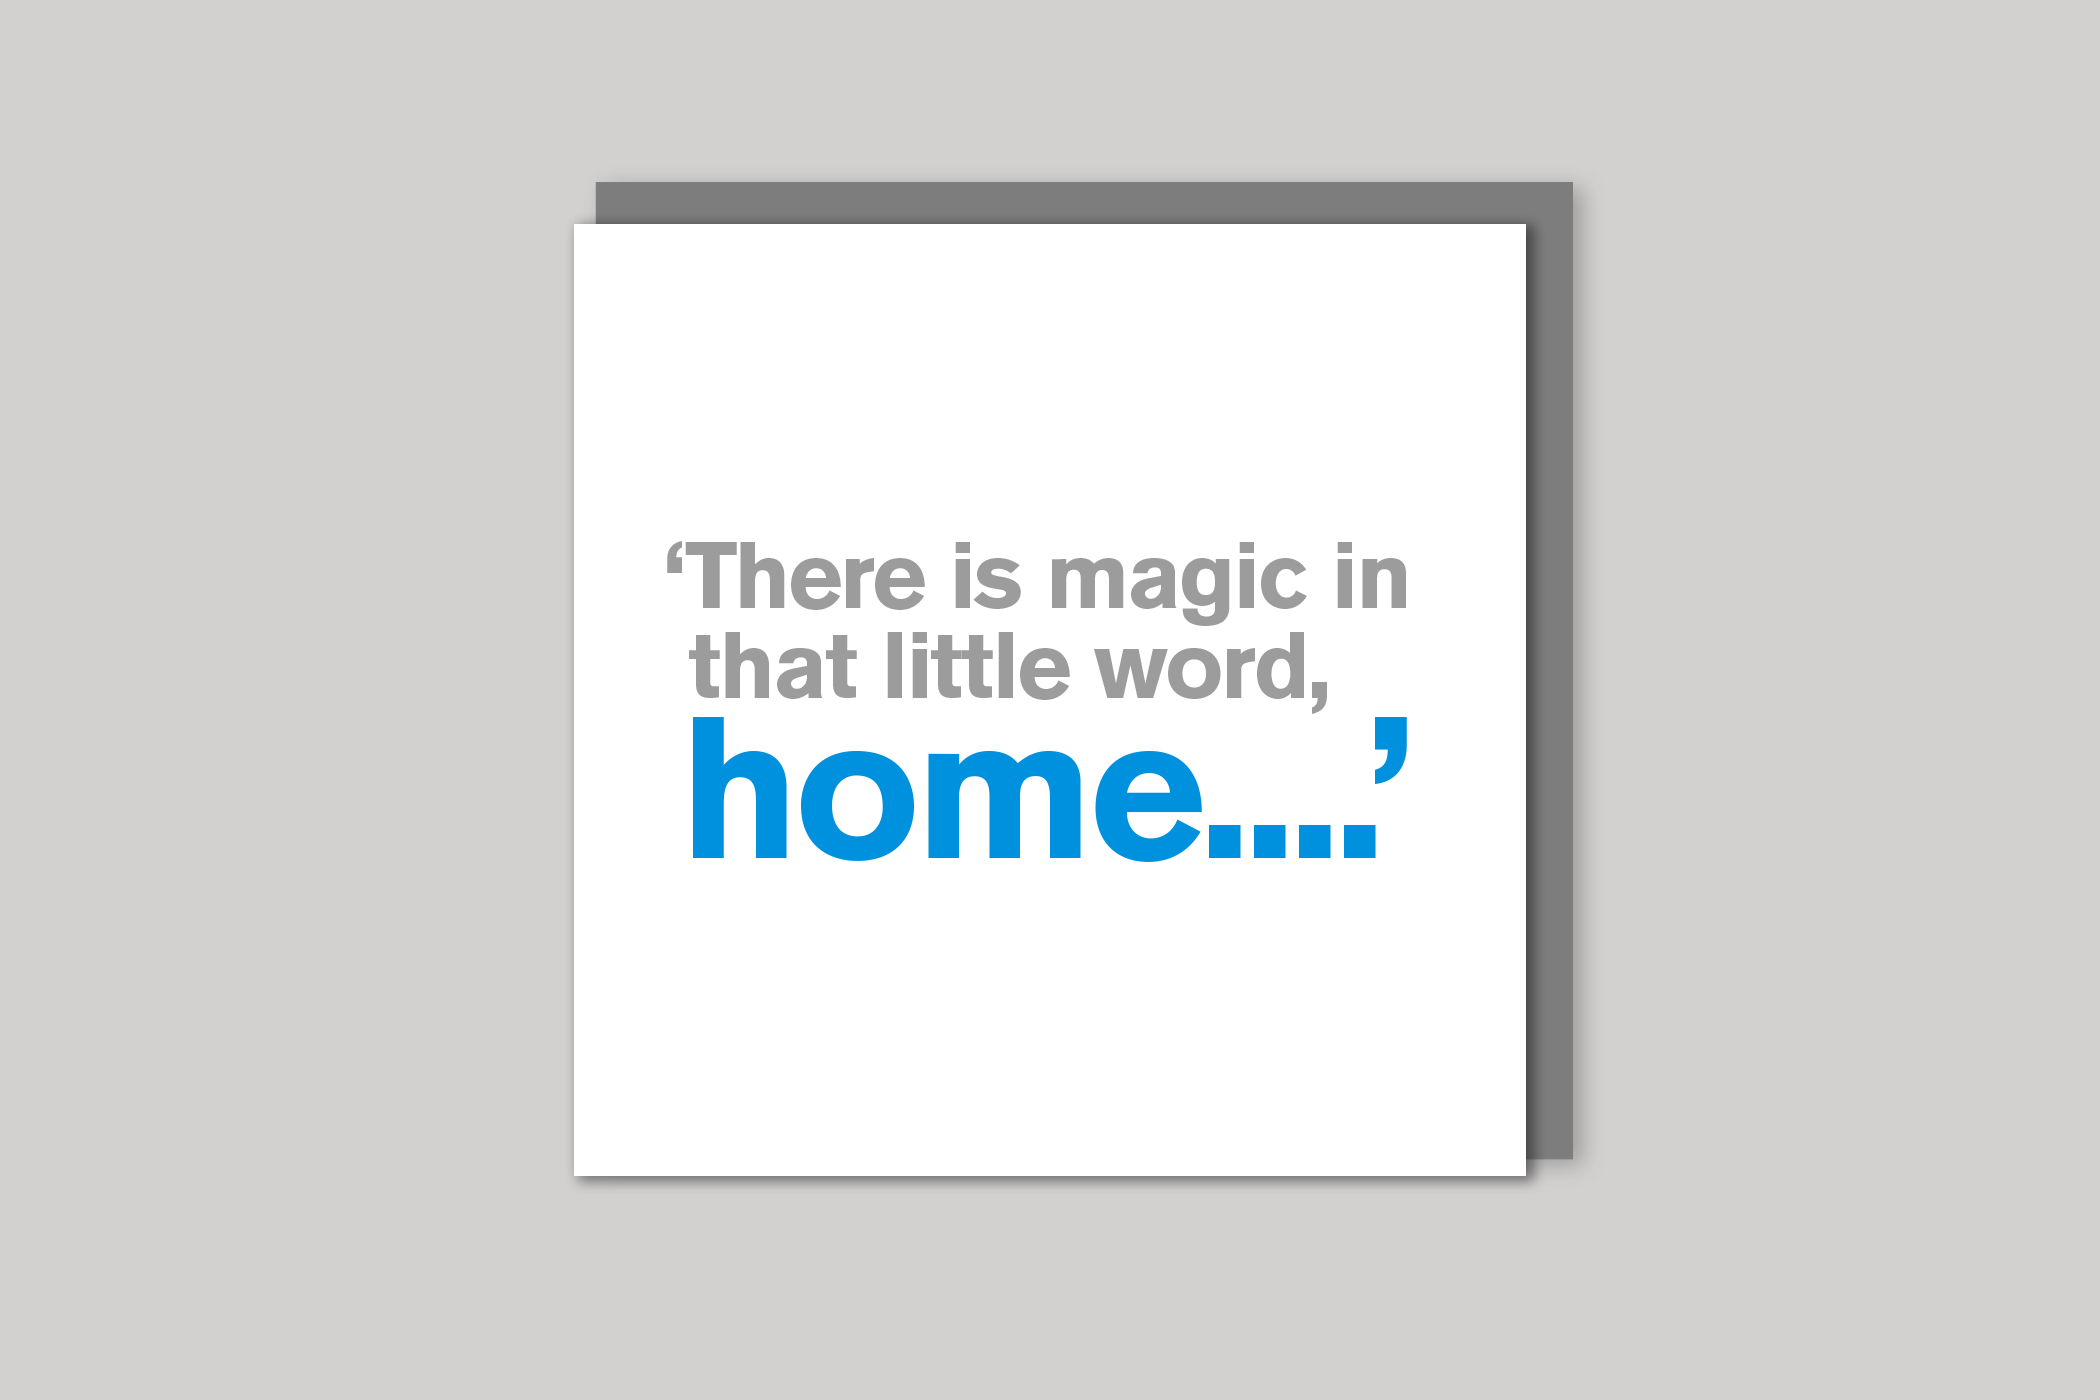 Home new home card from Lyric range of quotation cards by Icon, back page.